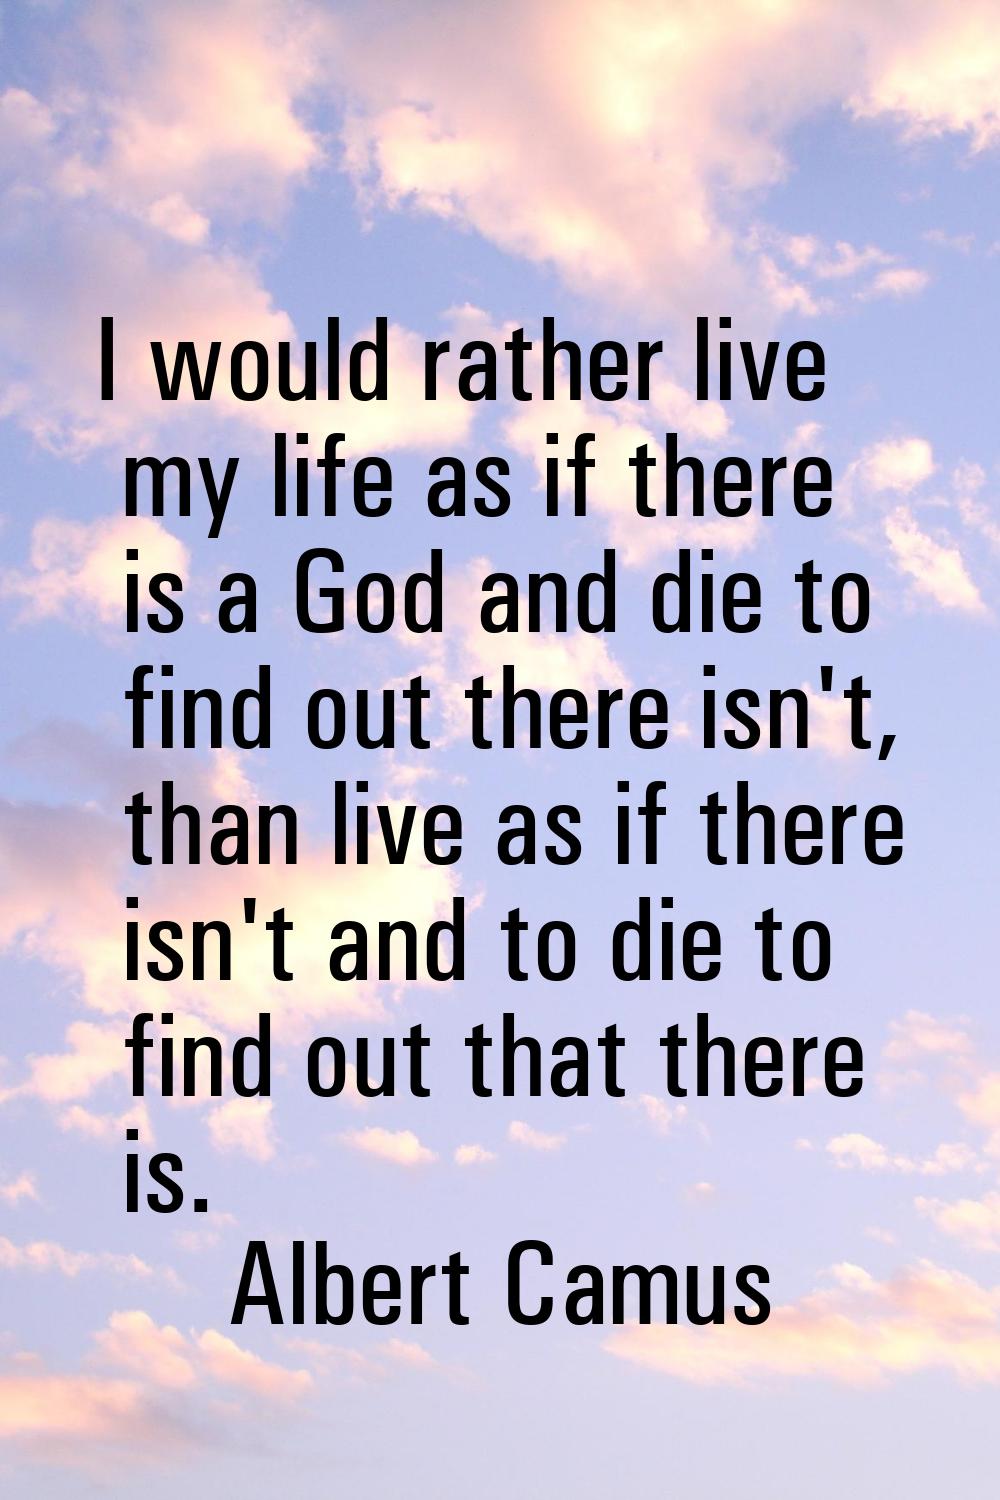 I would rather live my life as if there is a God and die to find out there isn't, than live as if t